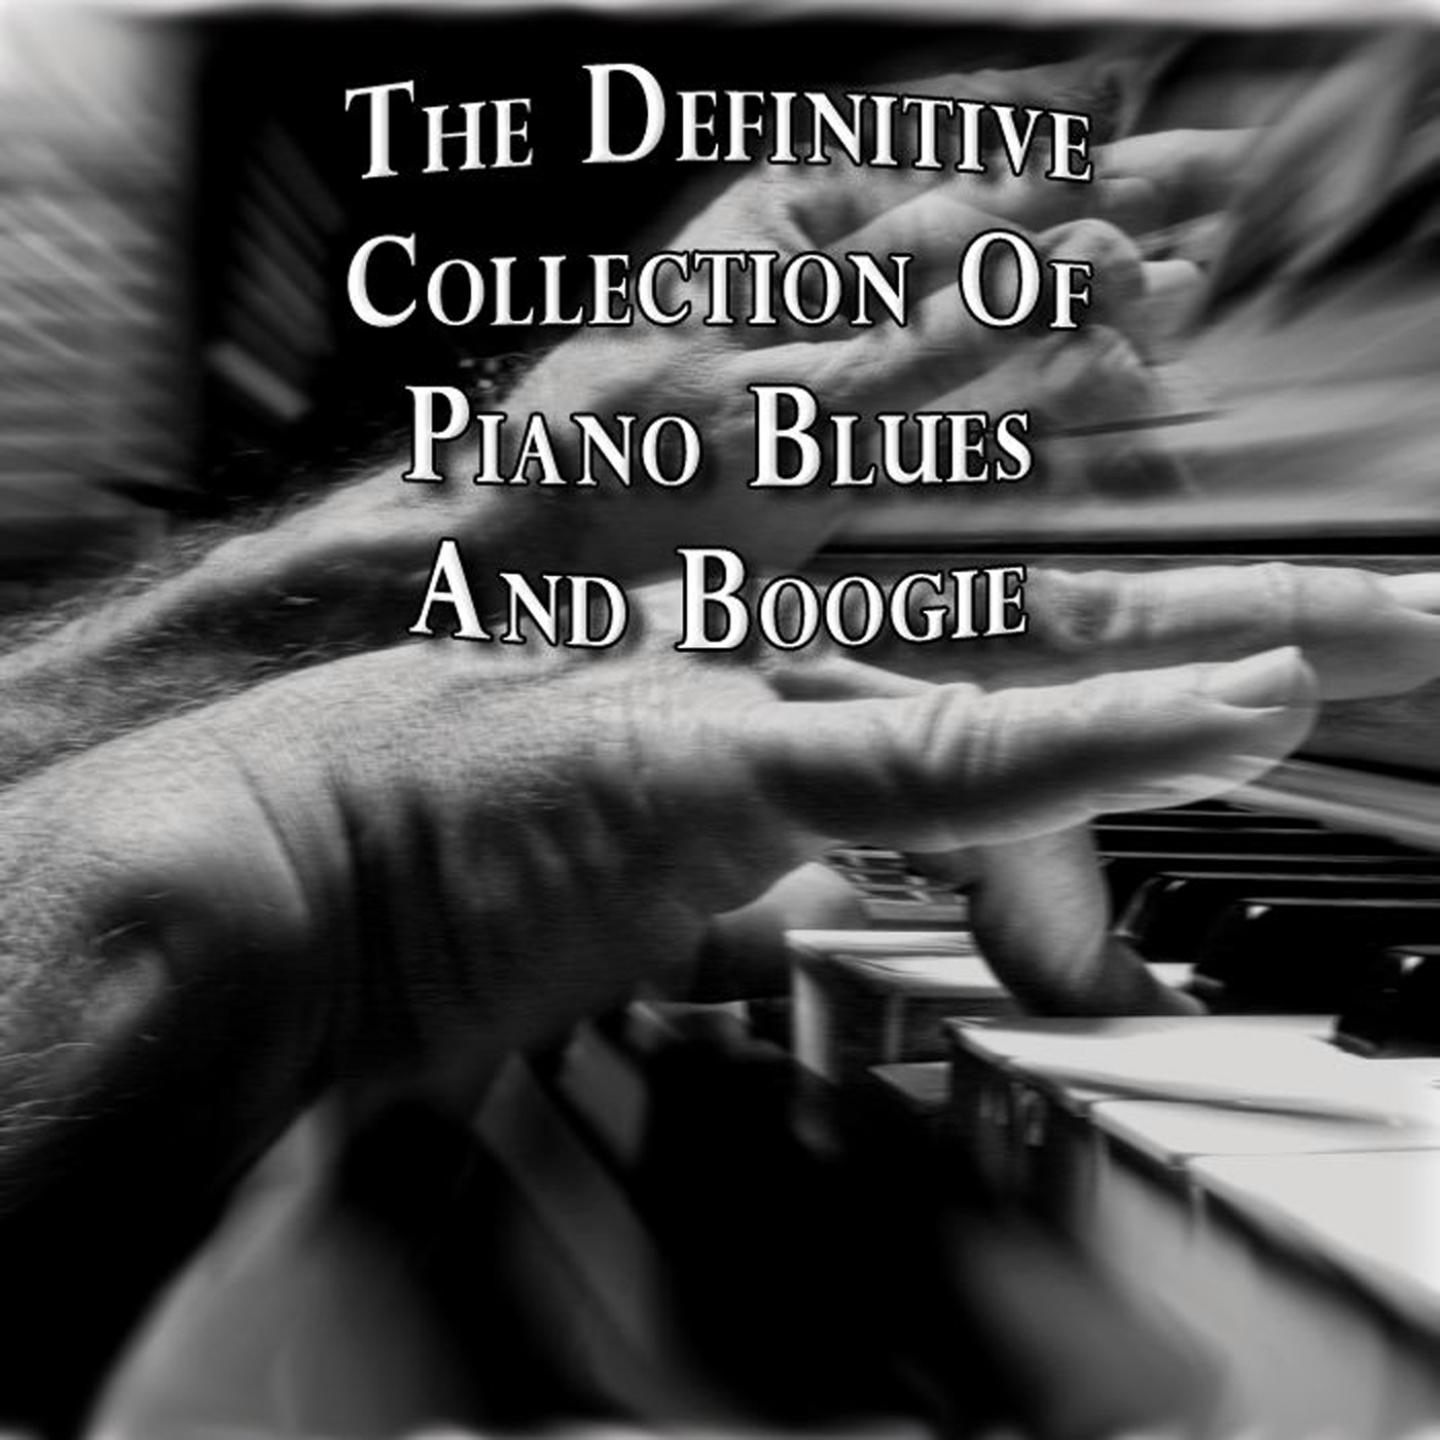 The Definitive Collection of Piano Blues and Boogie